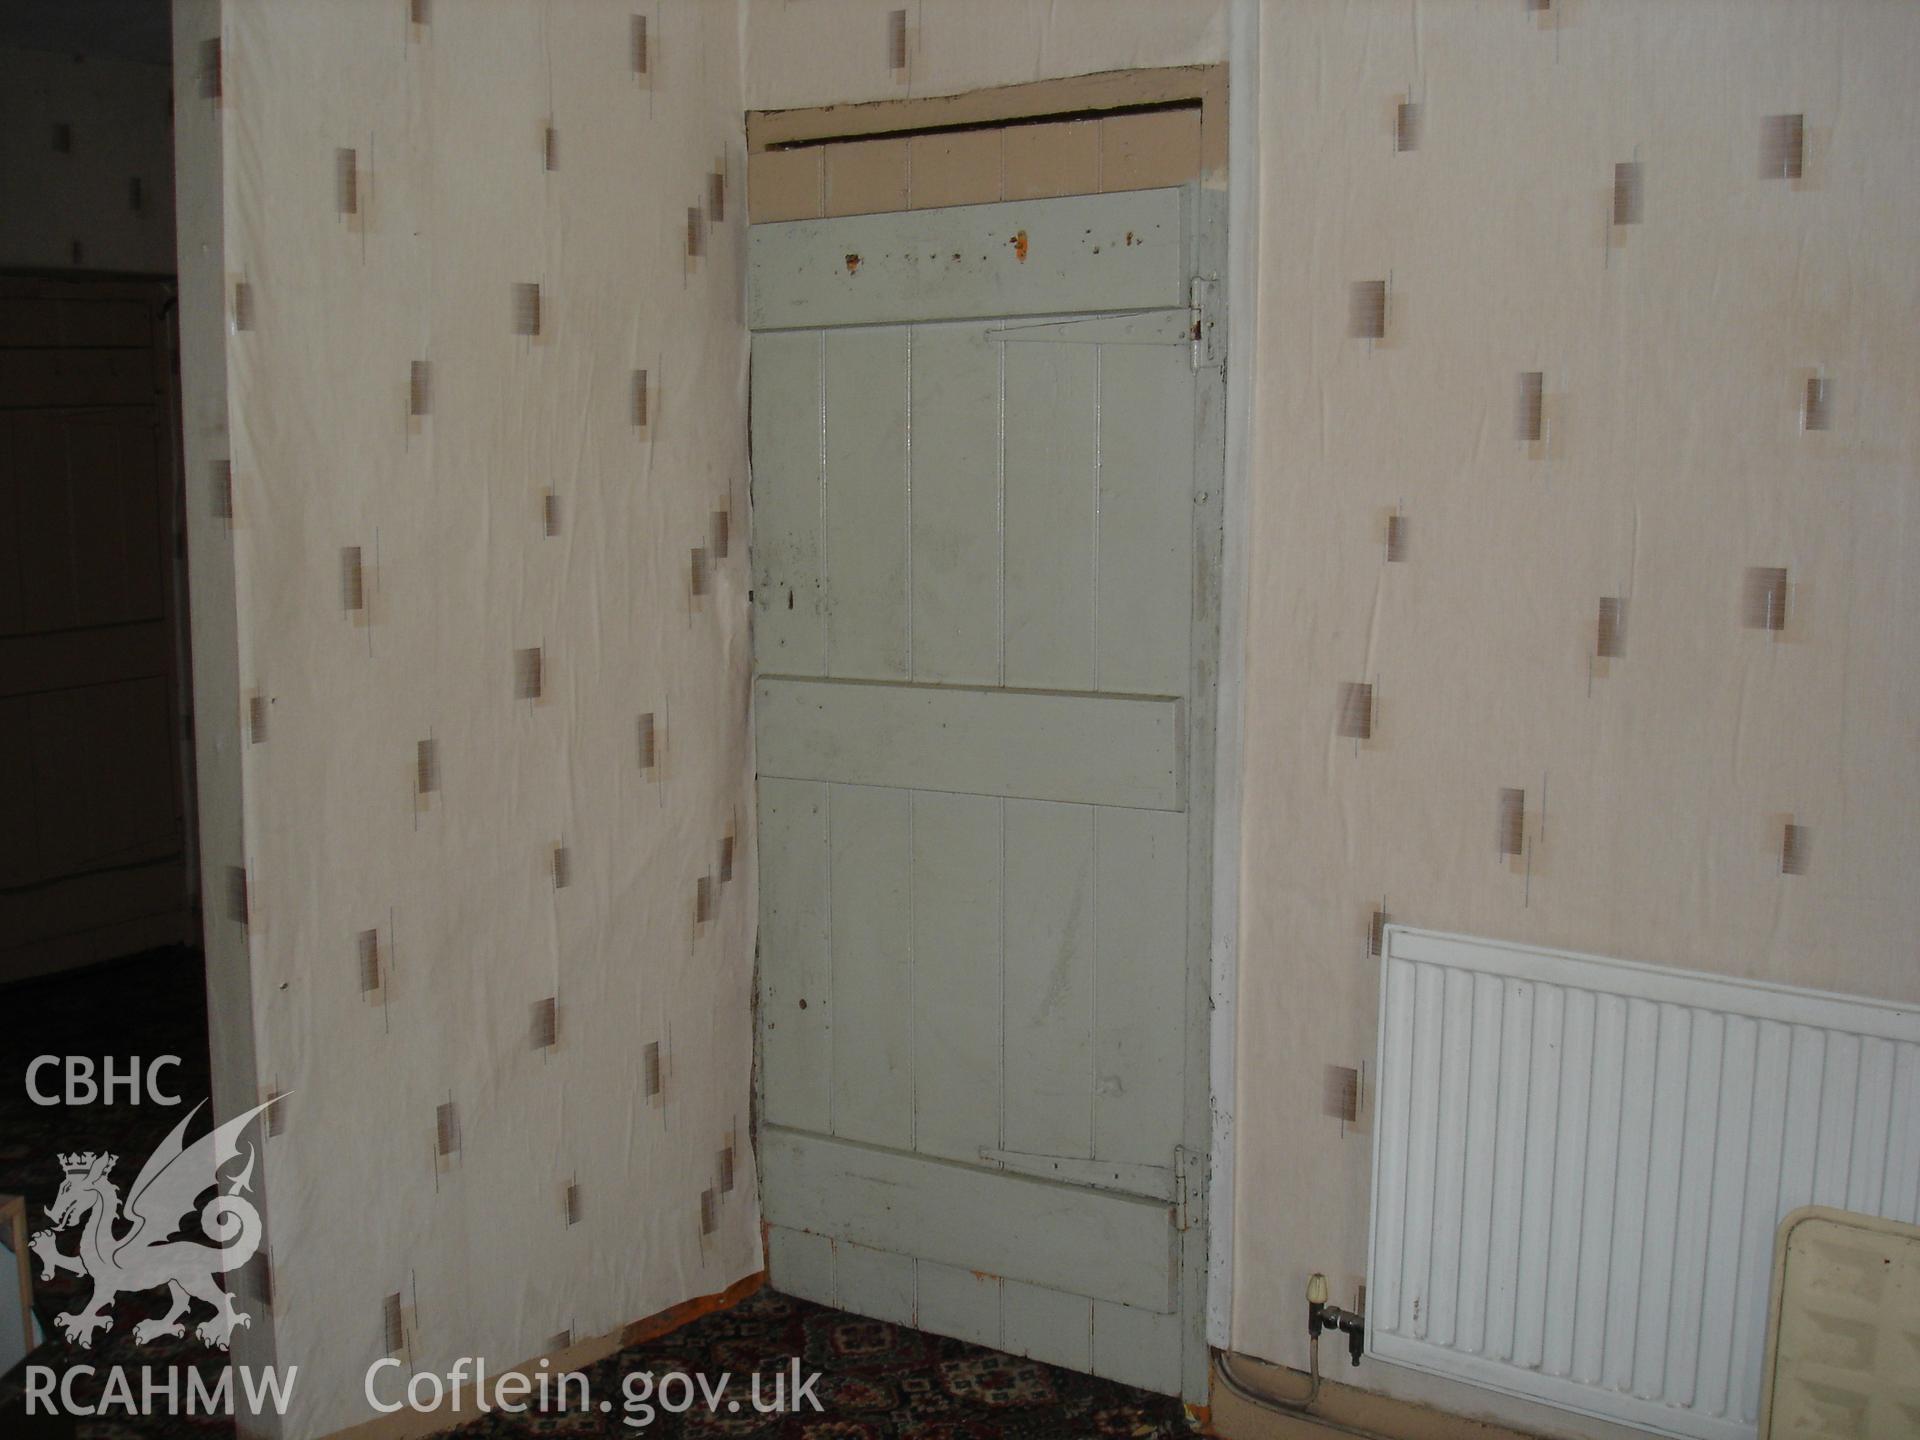 Colour digital photograph showing interior view (door) of a cottage at Gelli Houses, Cymmer.